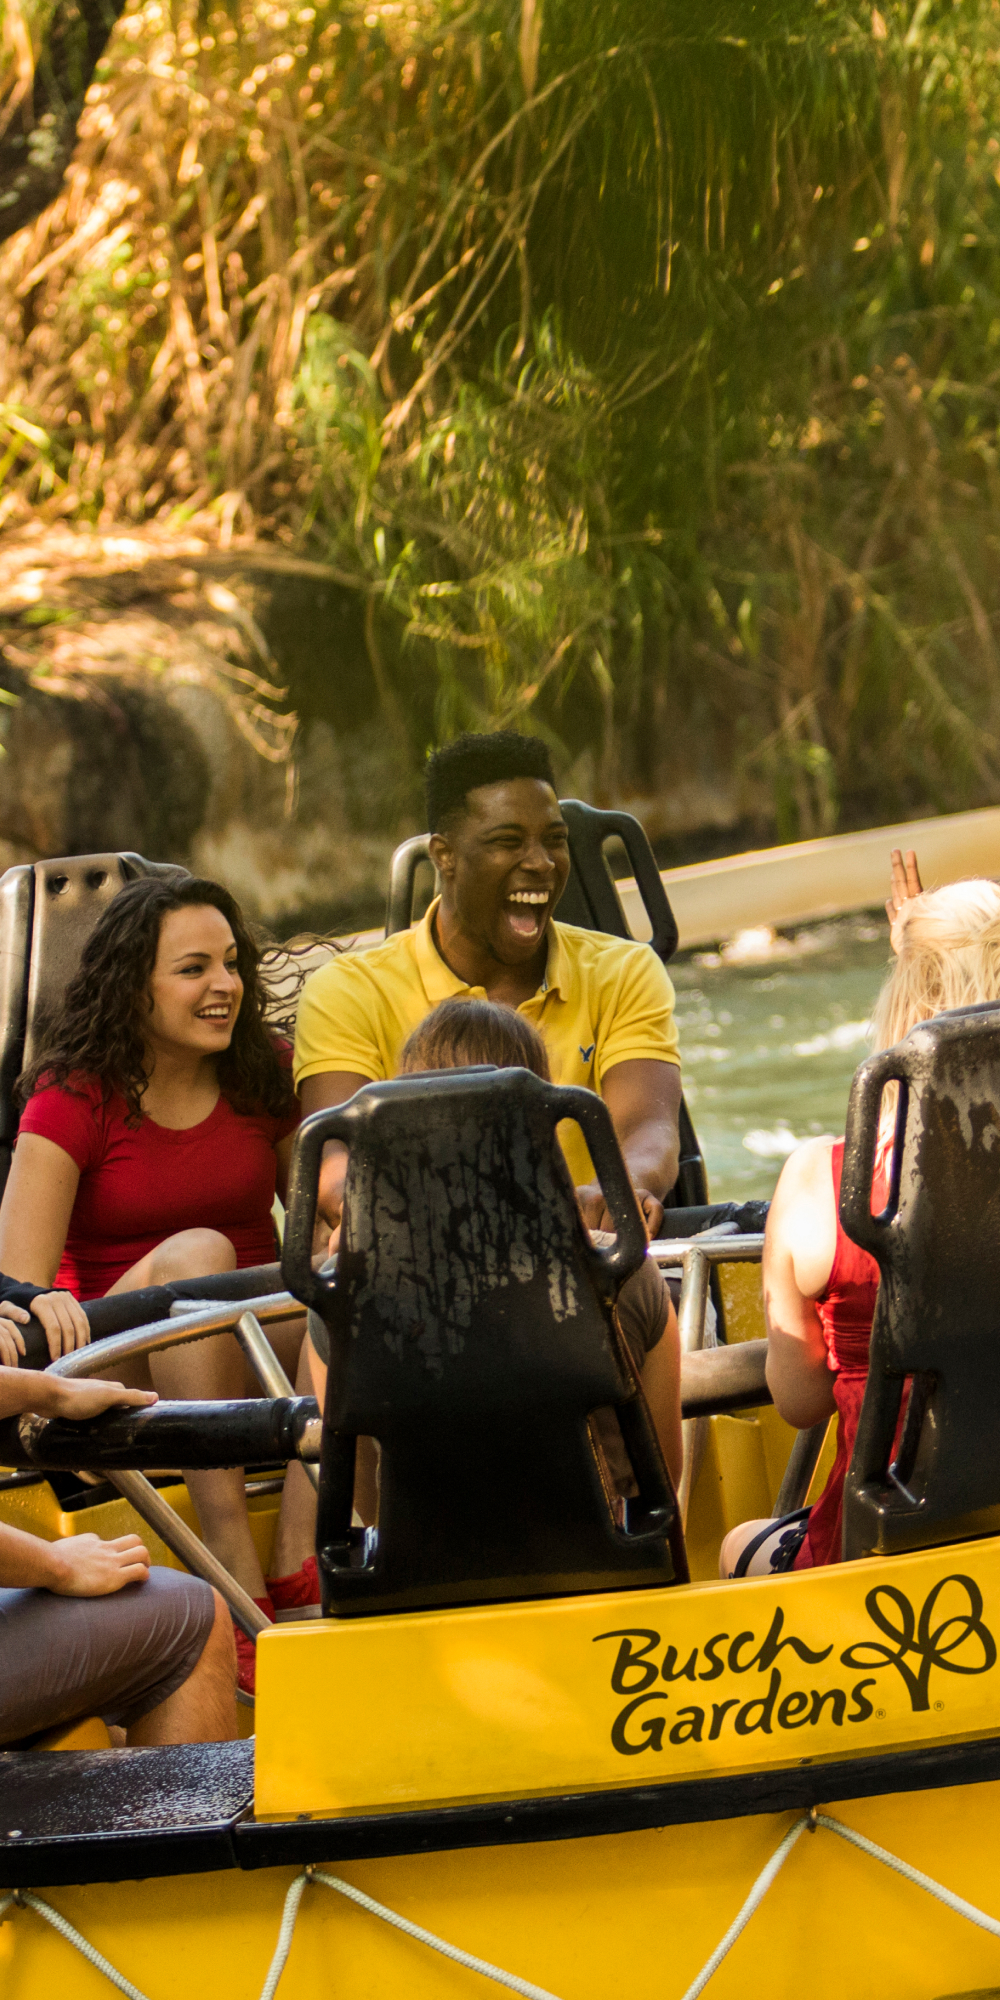 Beat the heat and get soaked on Congo River Rapids at Busch Gardens Tampa Bay.